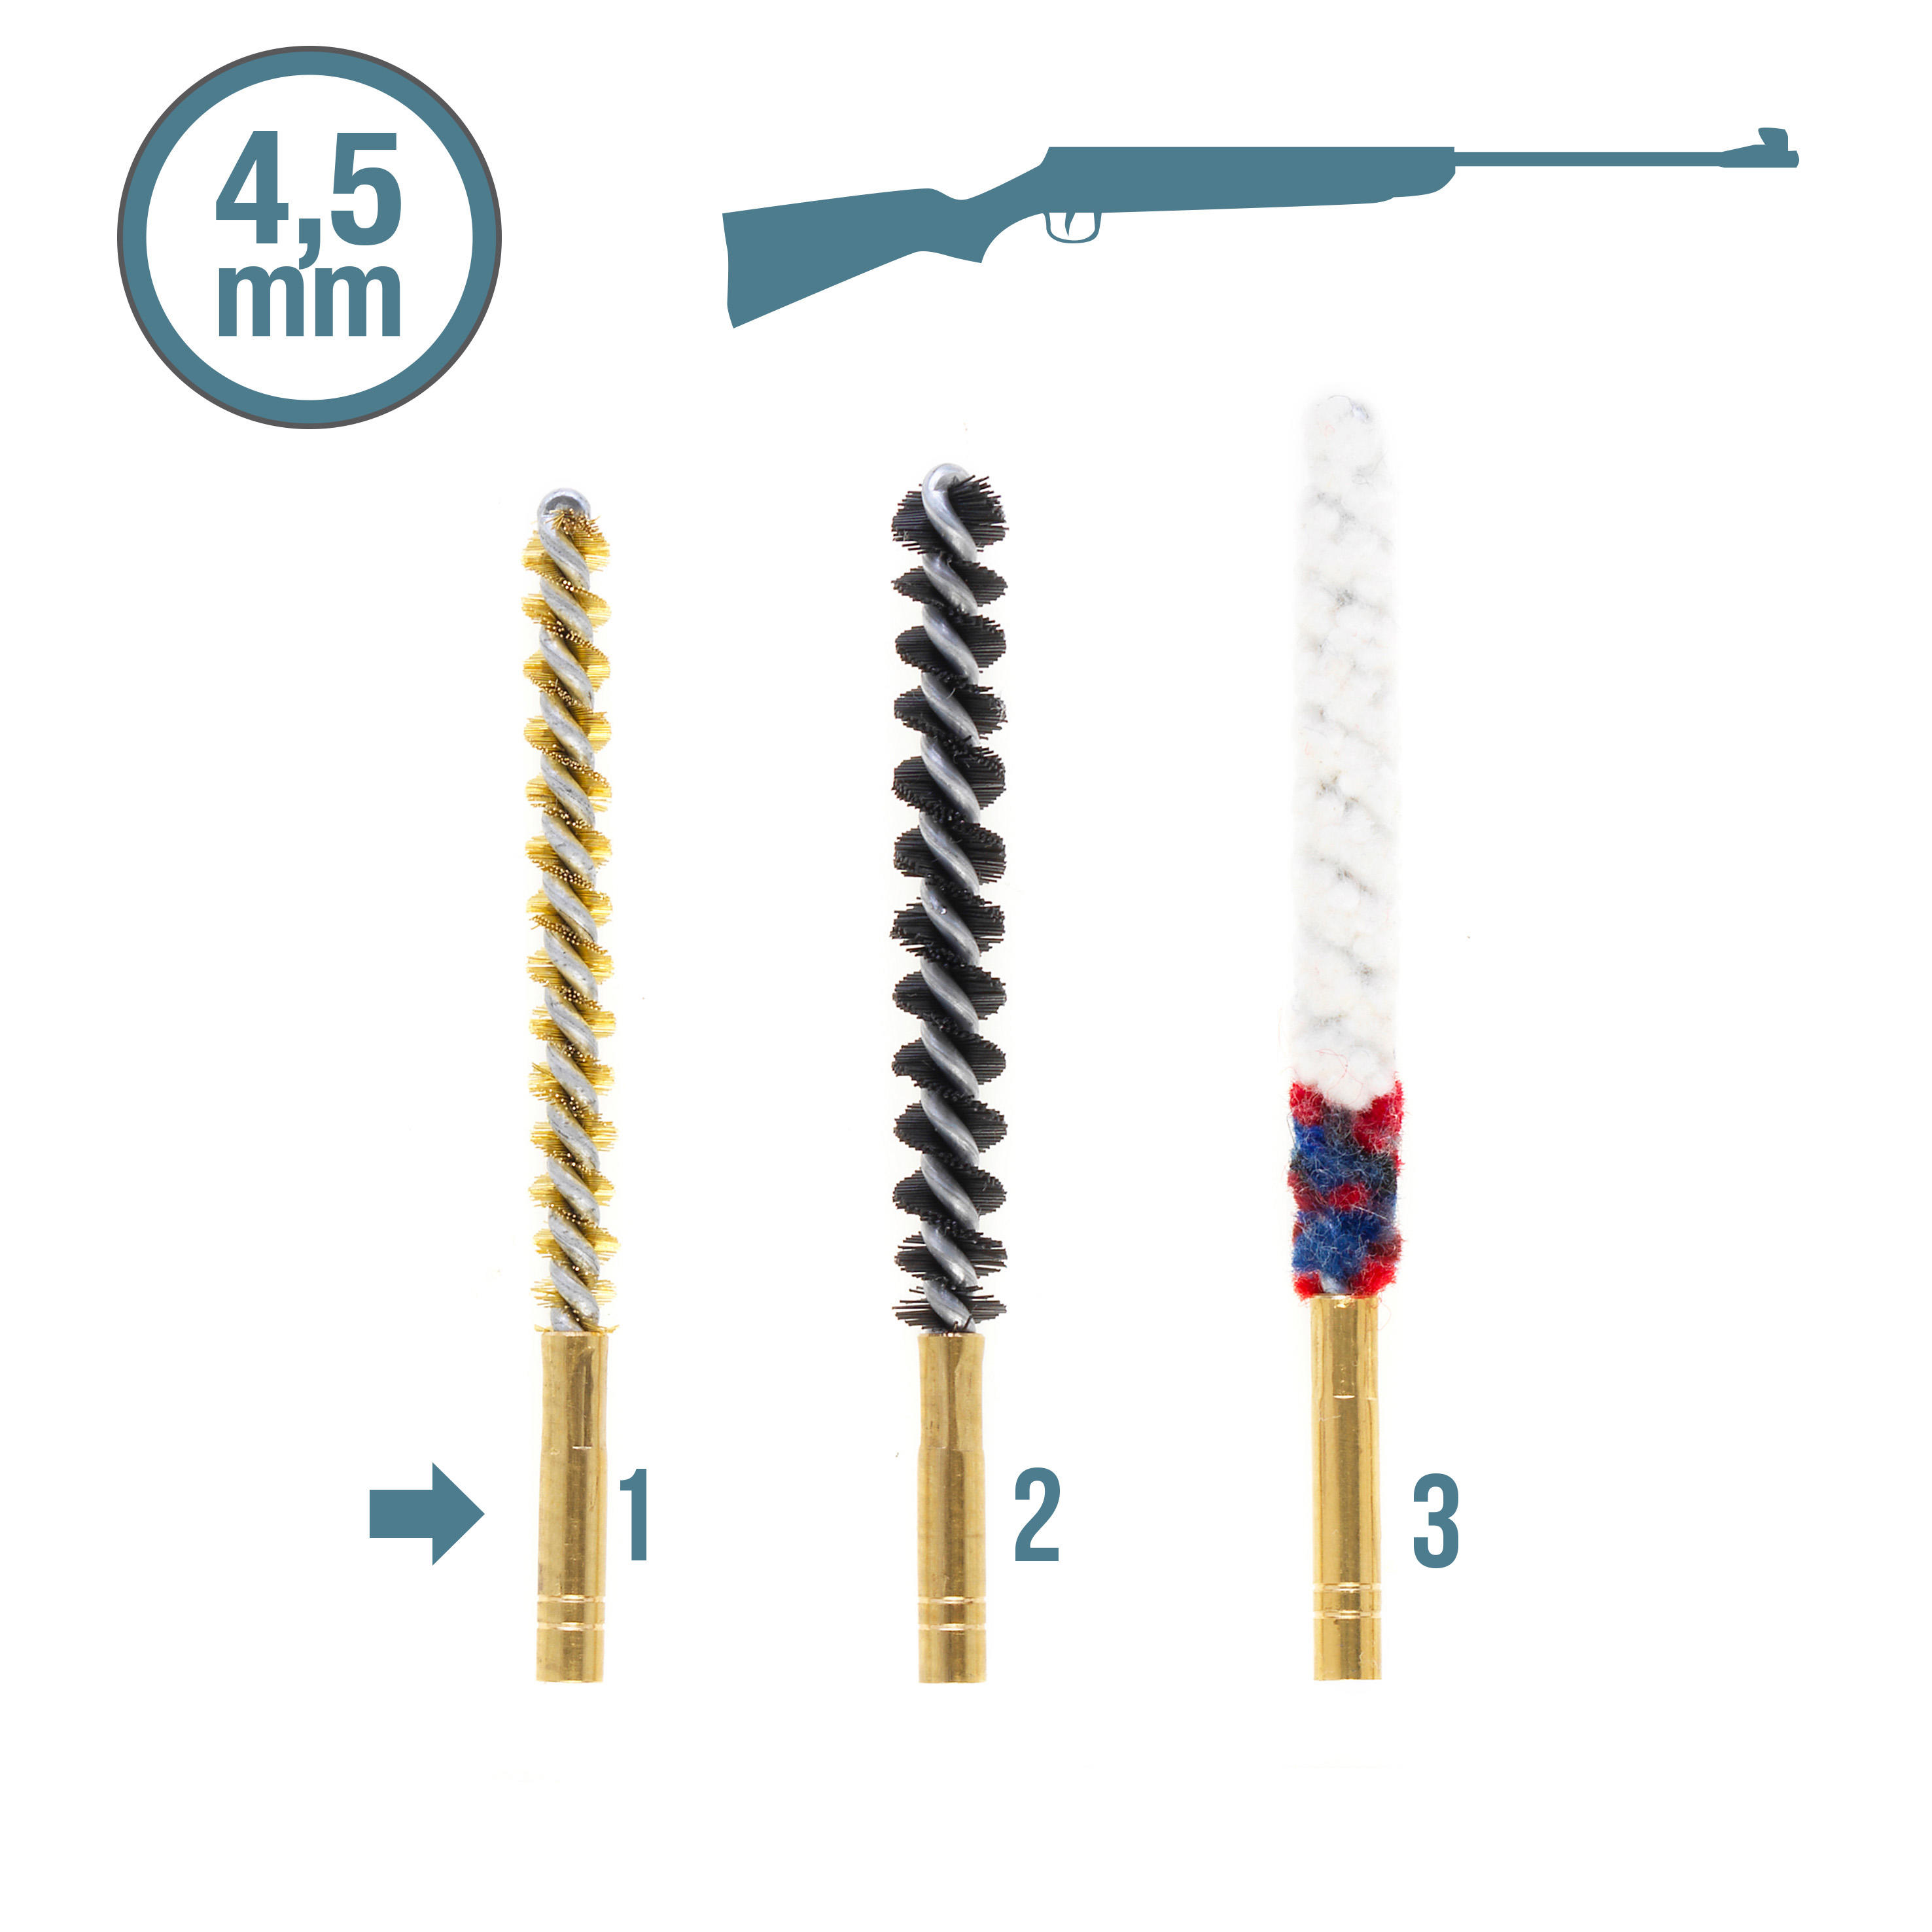 Cleaning kit 4.5 mm calibre - SOLOGNAC